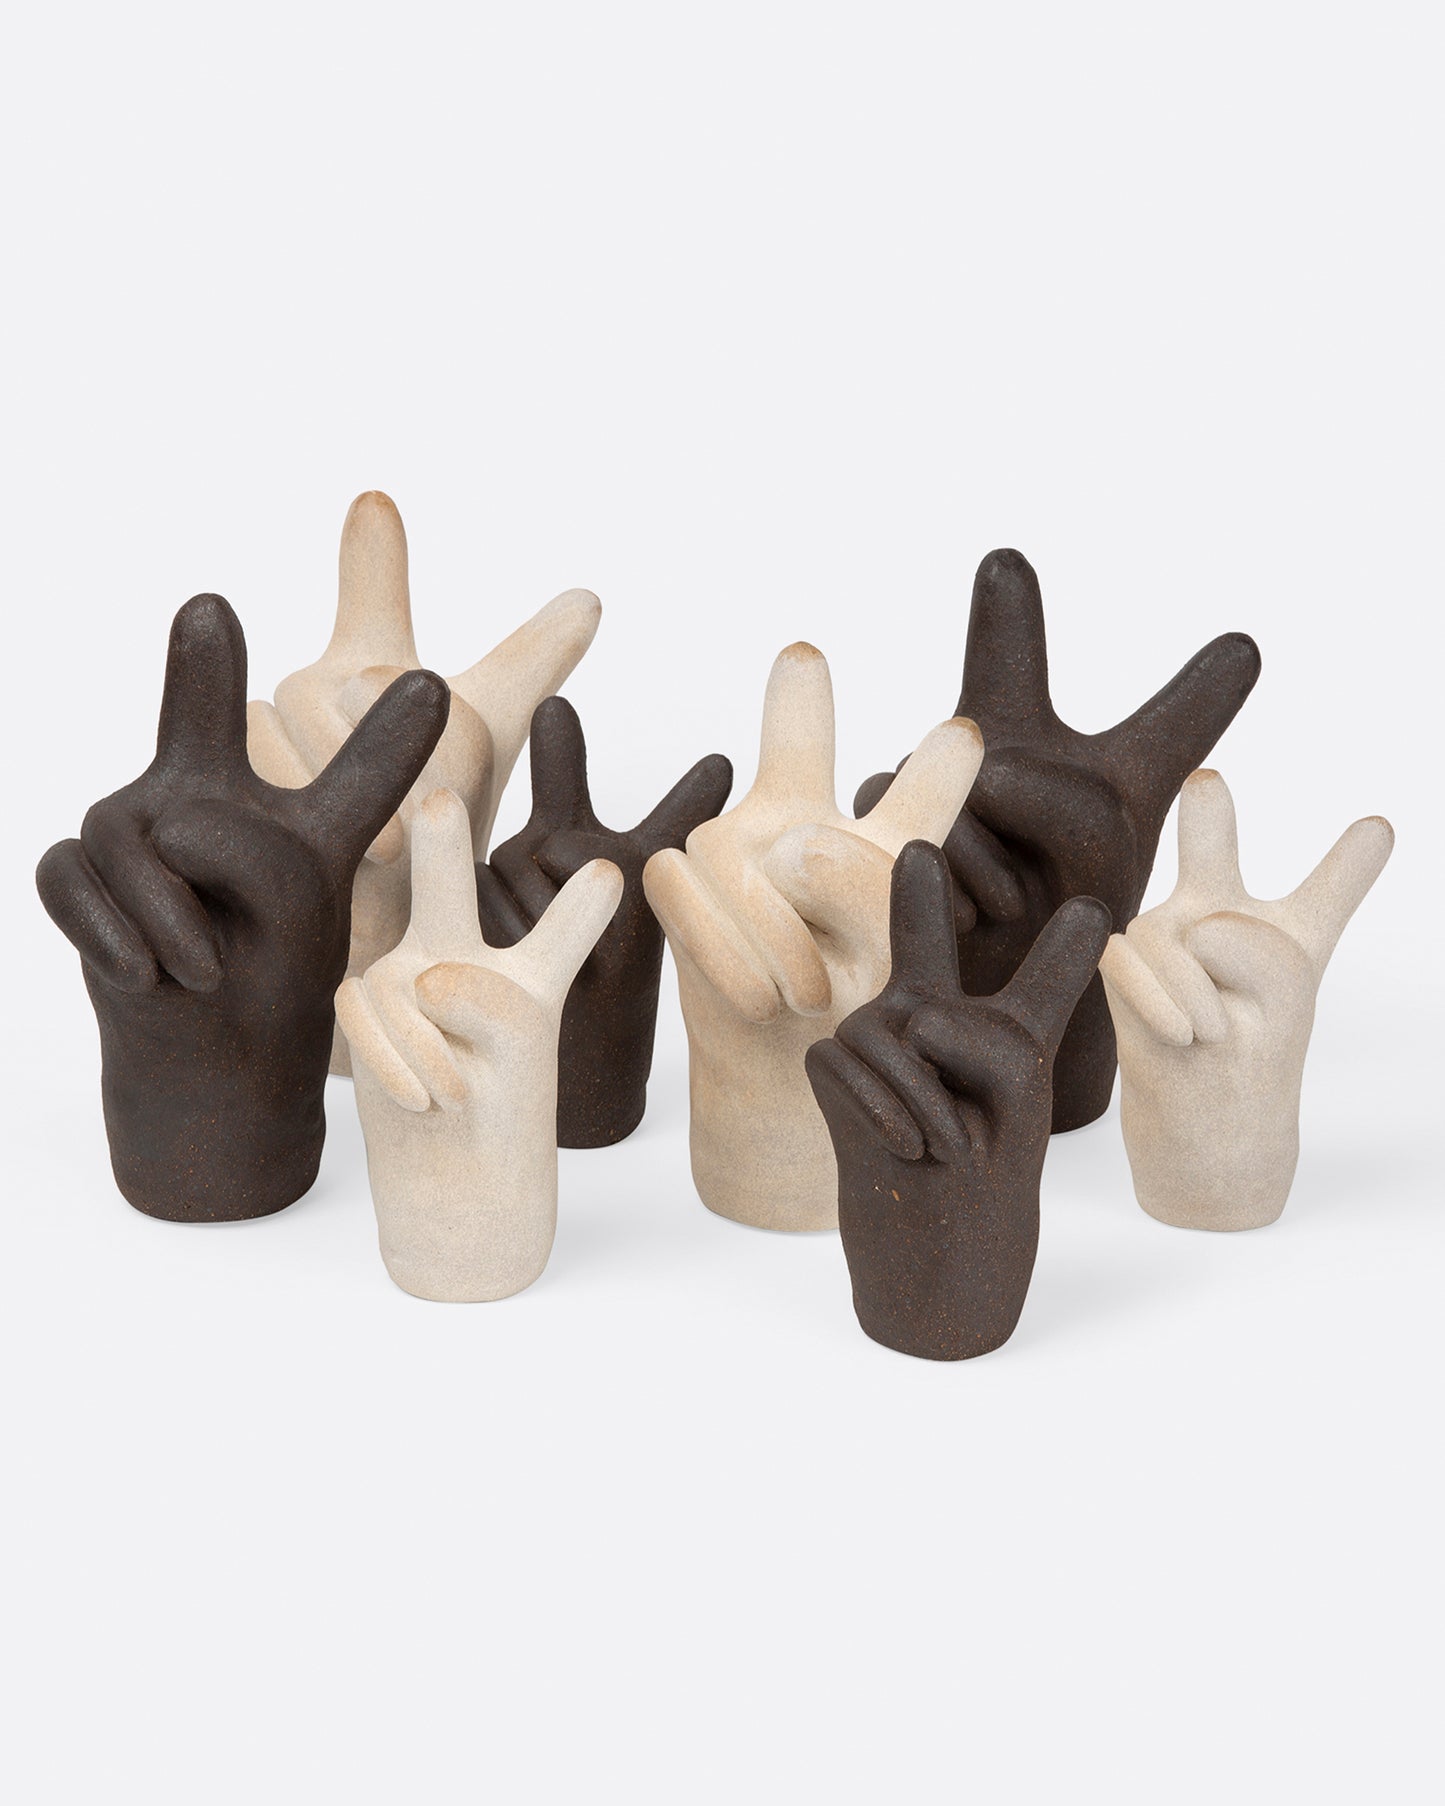 A group of off-white and dark brown peace hand sculptures, shown from the front.